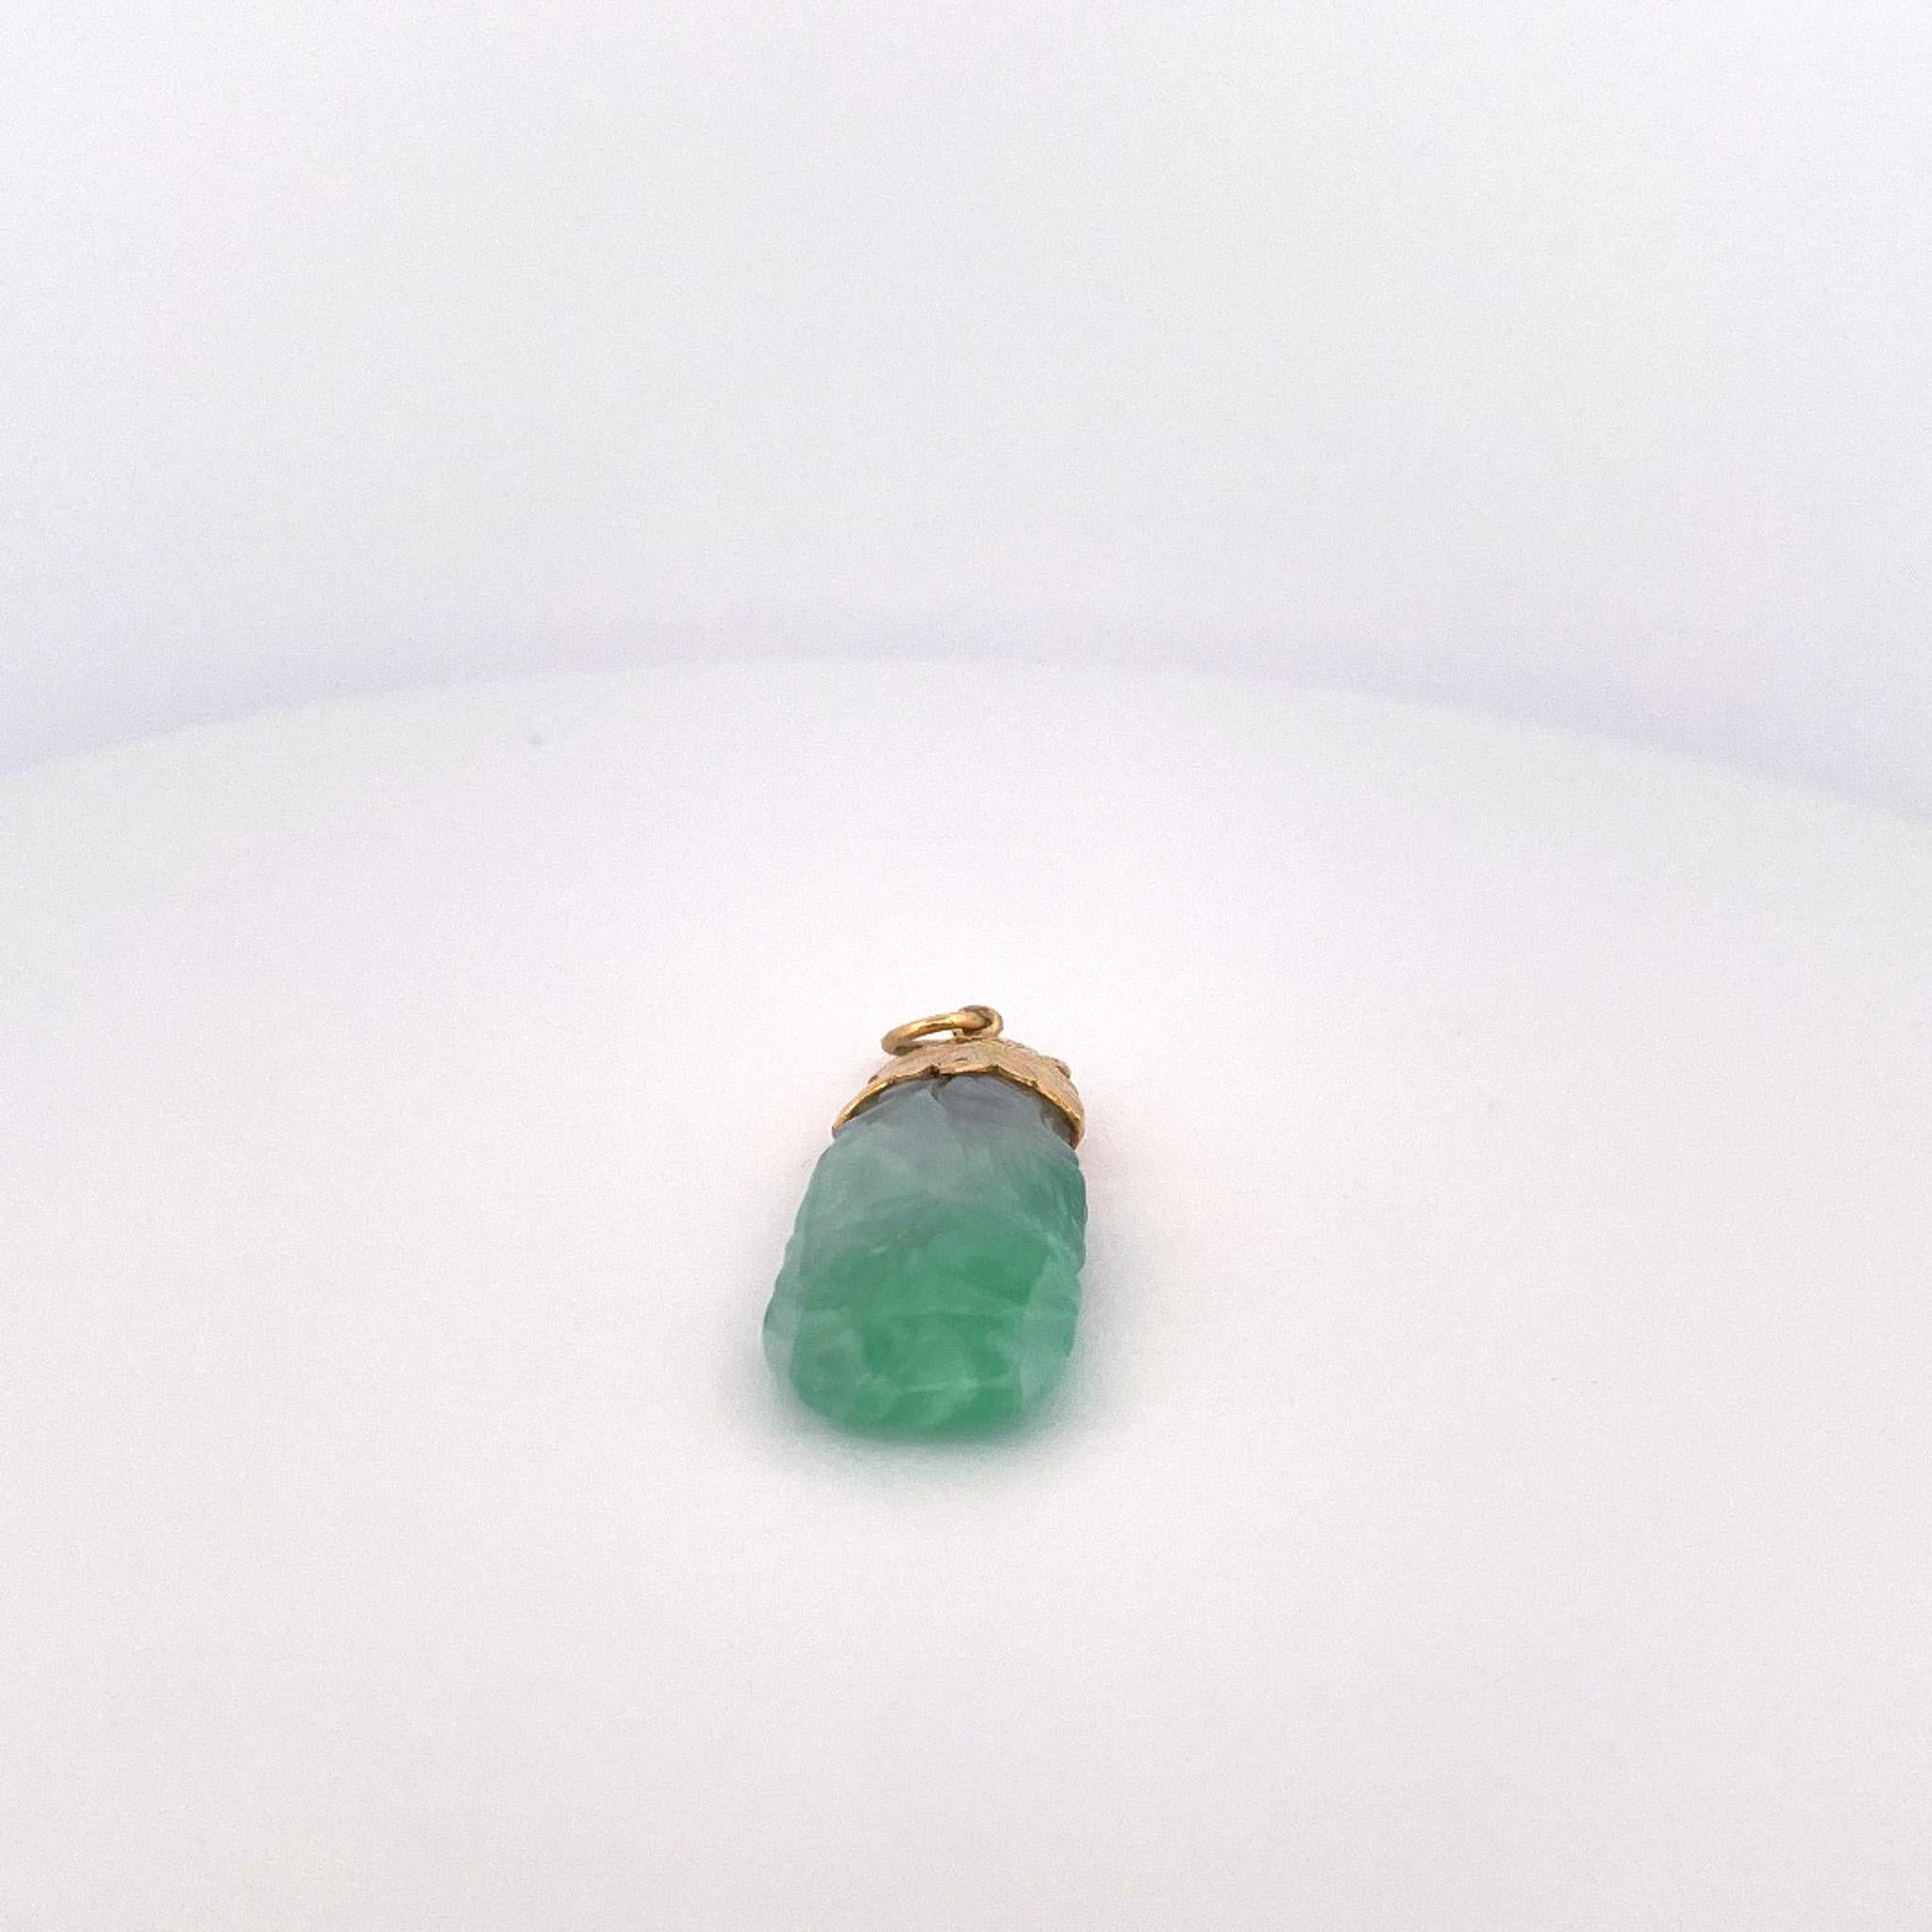 Modernist 1970s 24k Yellow Gold Carved Jadeite Pendant For Sale